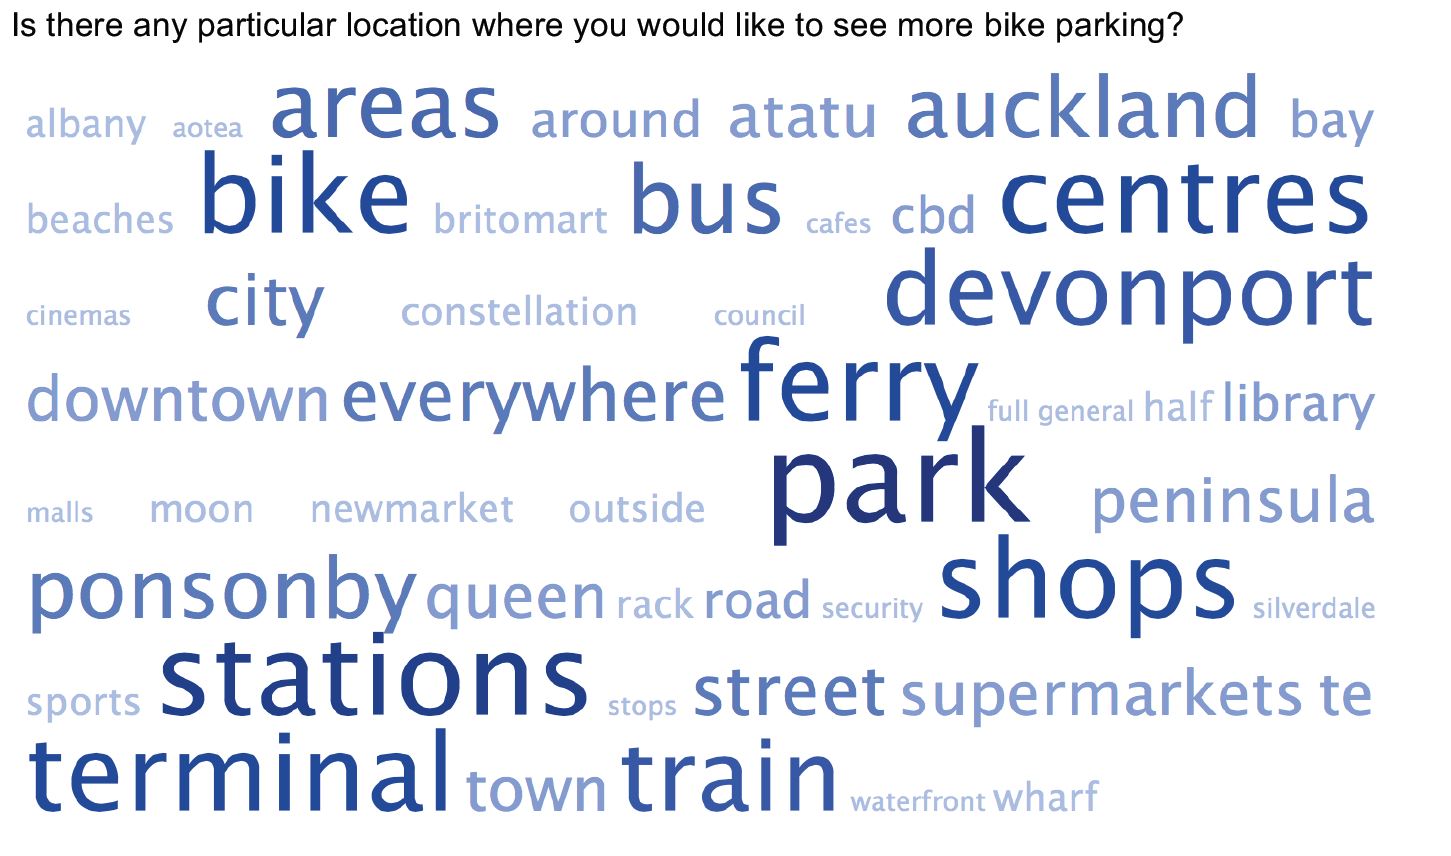 Preferred locations for bike parking results